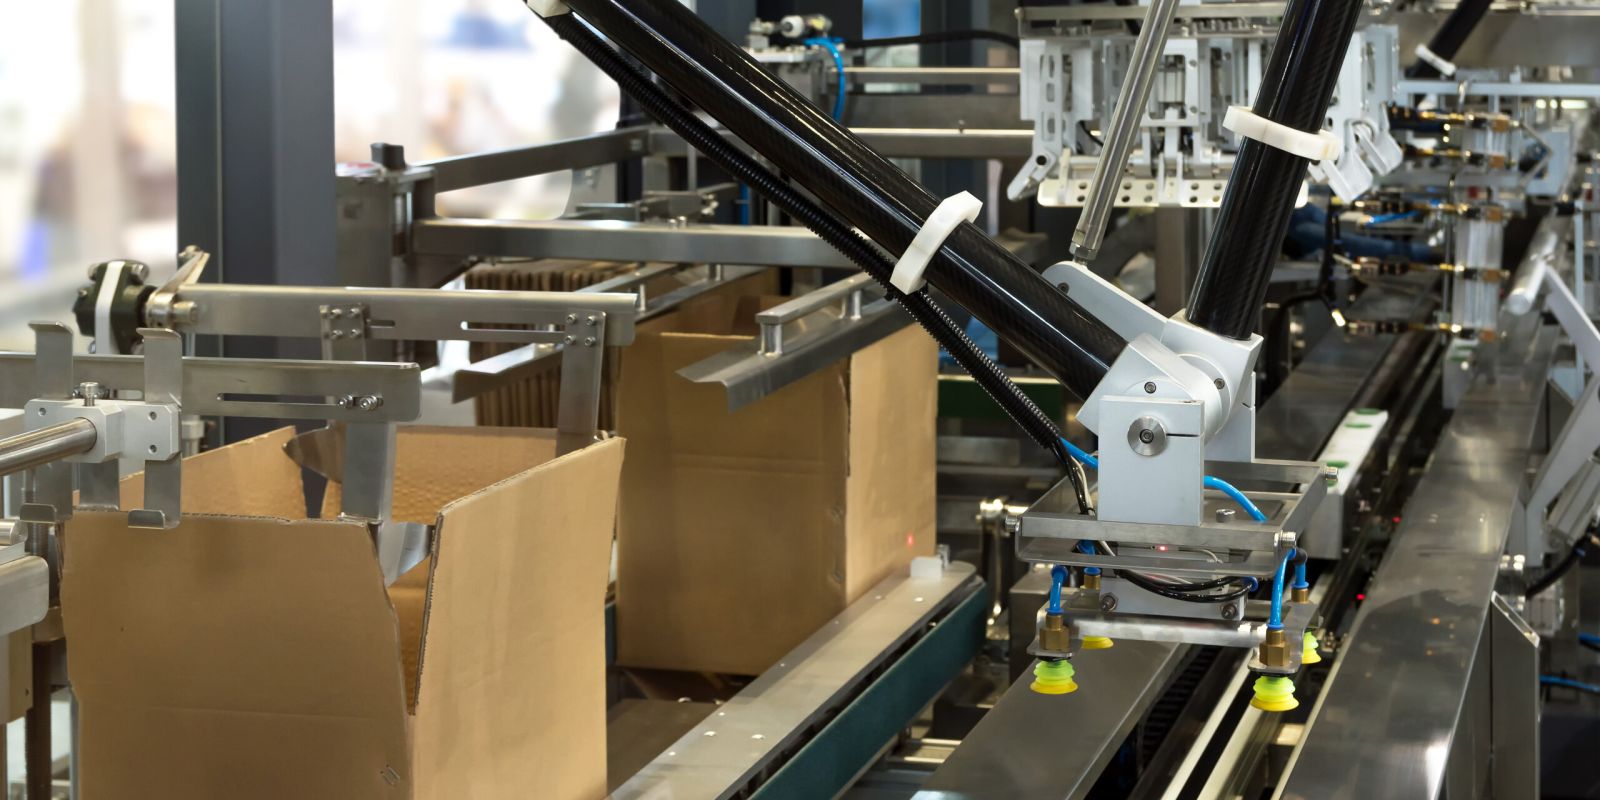 Packaging technology, or what is around the product